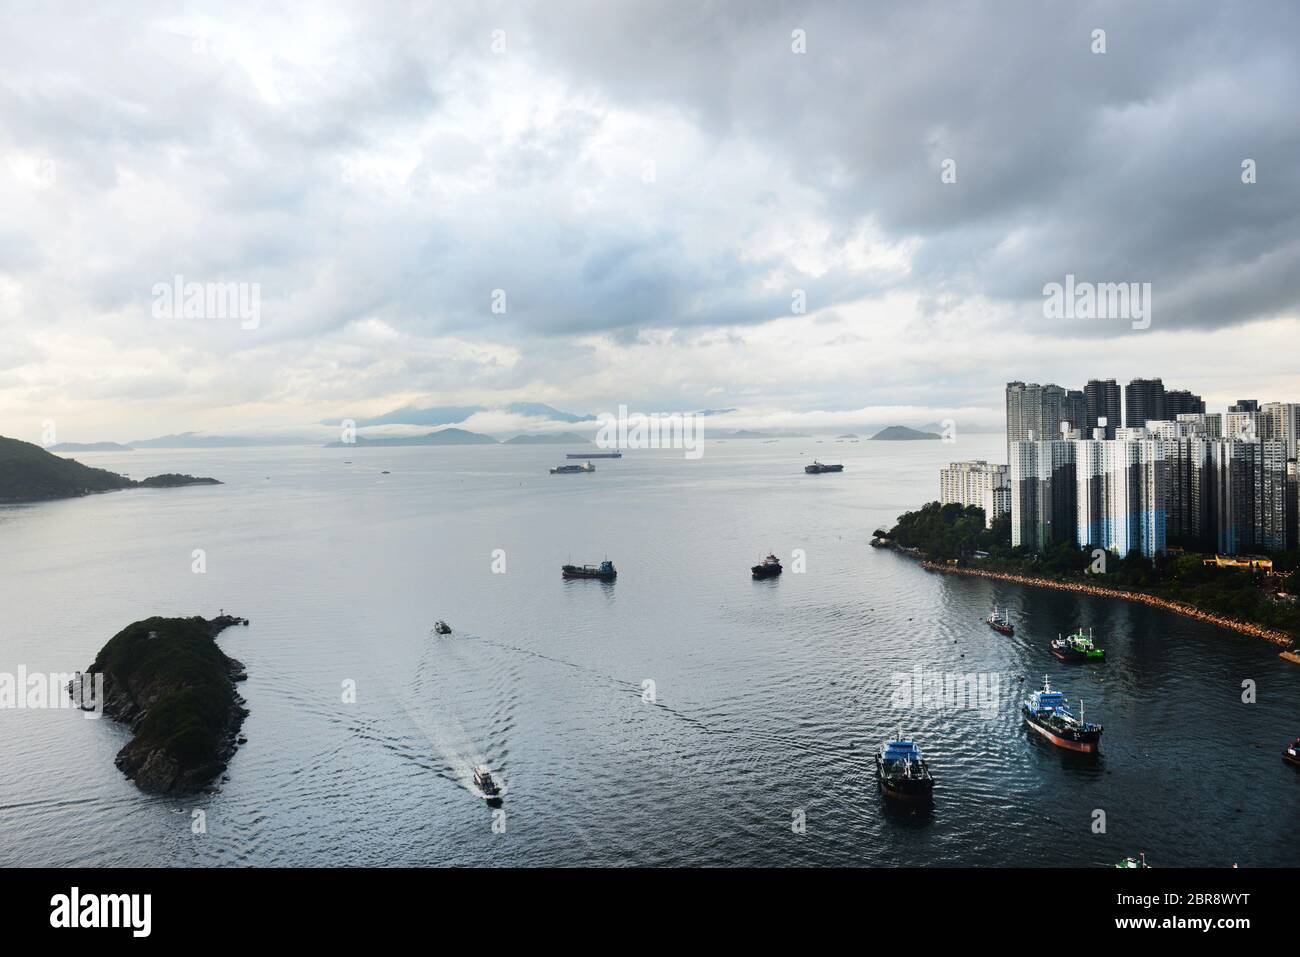 Views of residential complex in Hong Kong island's south side. Stock Photo